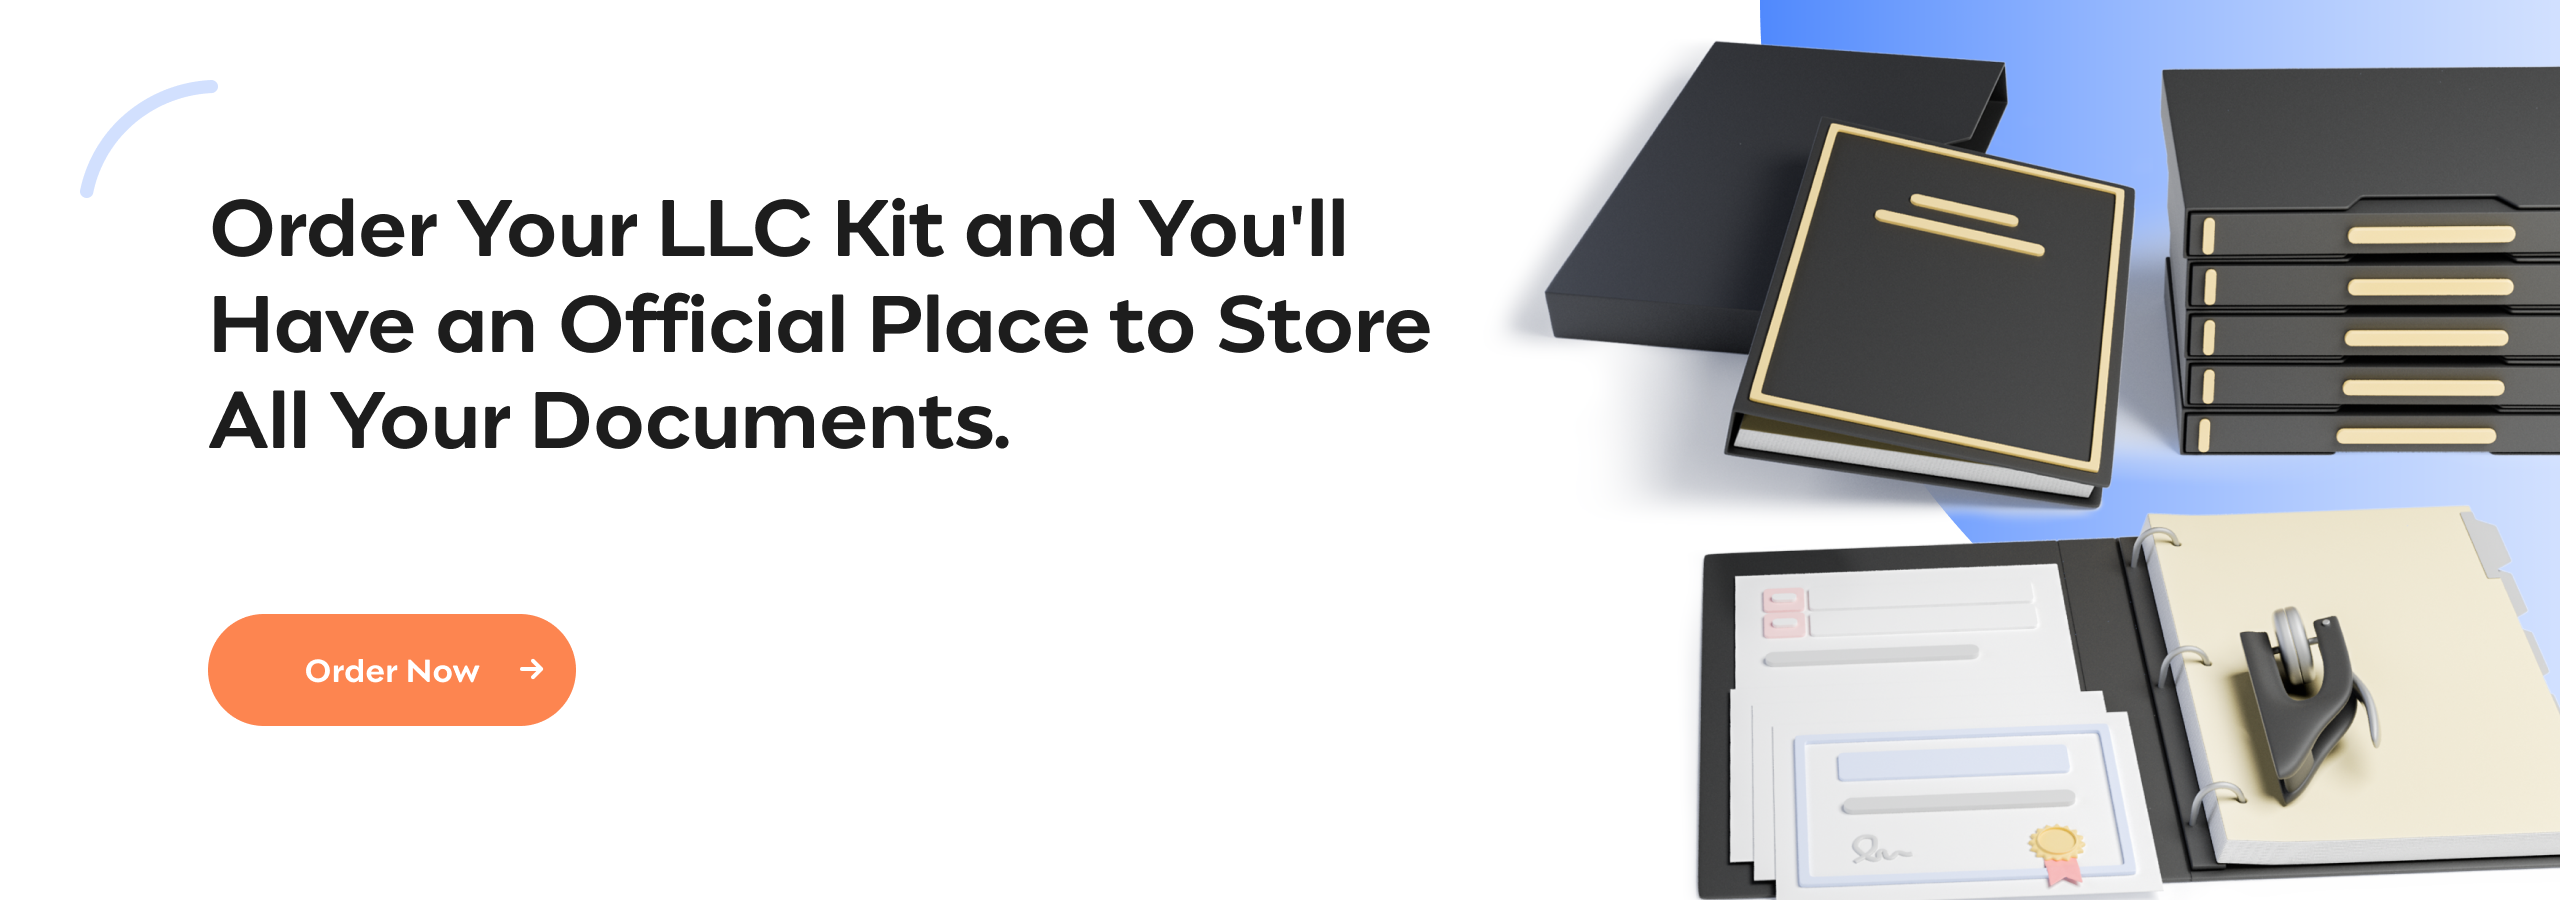 Order Your LLC Kit and You'll Have an Official Place to Store All Your Documents. Order Now.